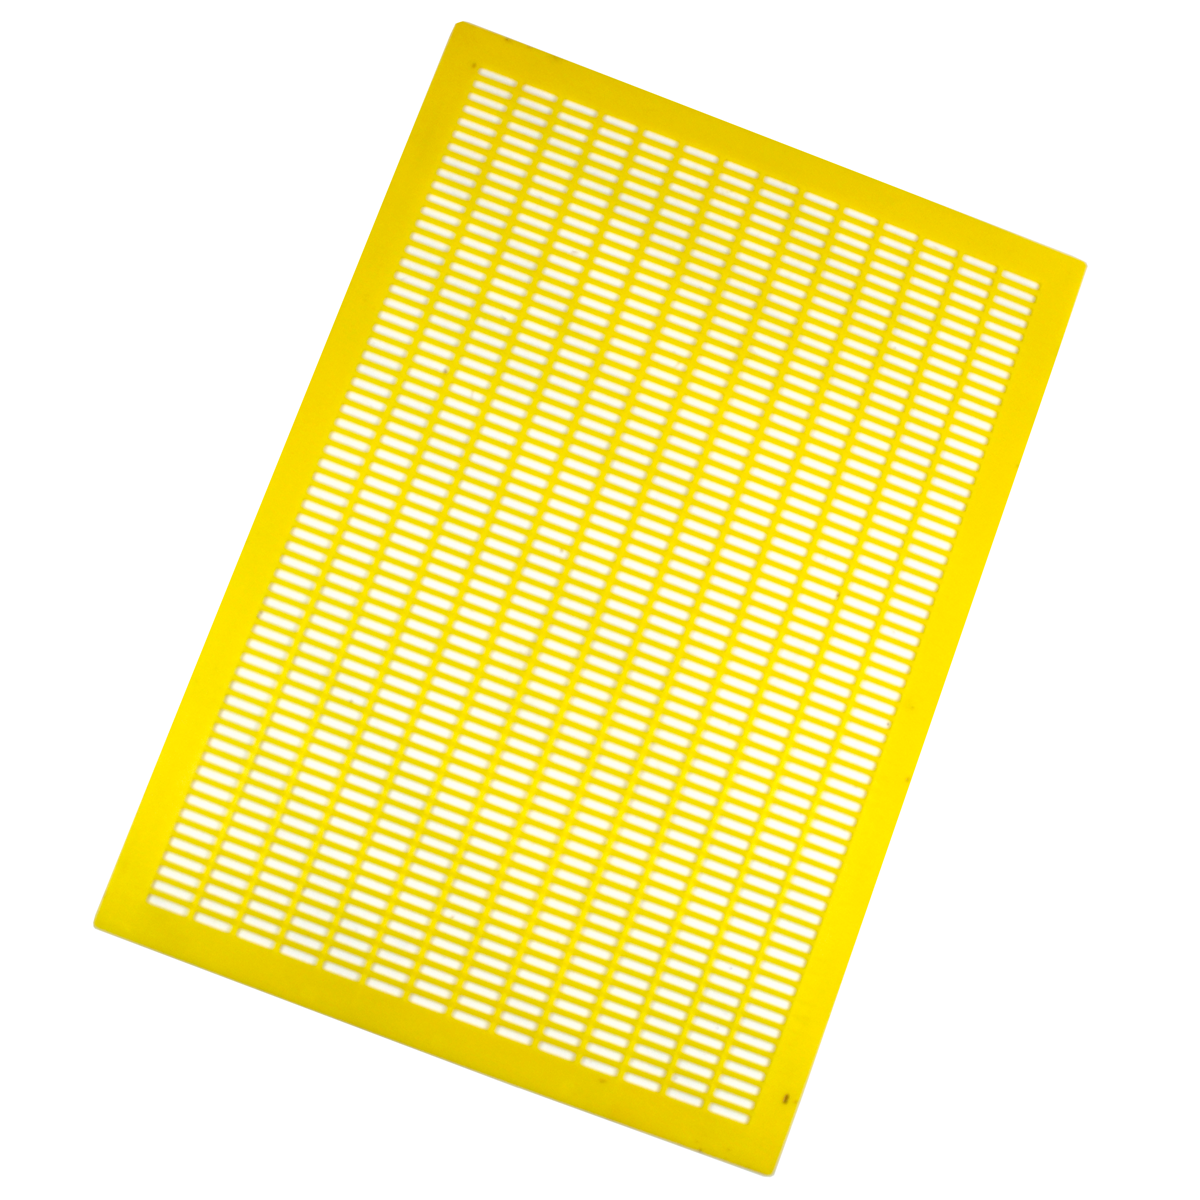 Galena Farms 8 Frame Plastic Queen Excluder Yellow